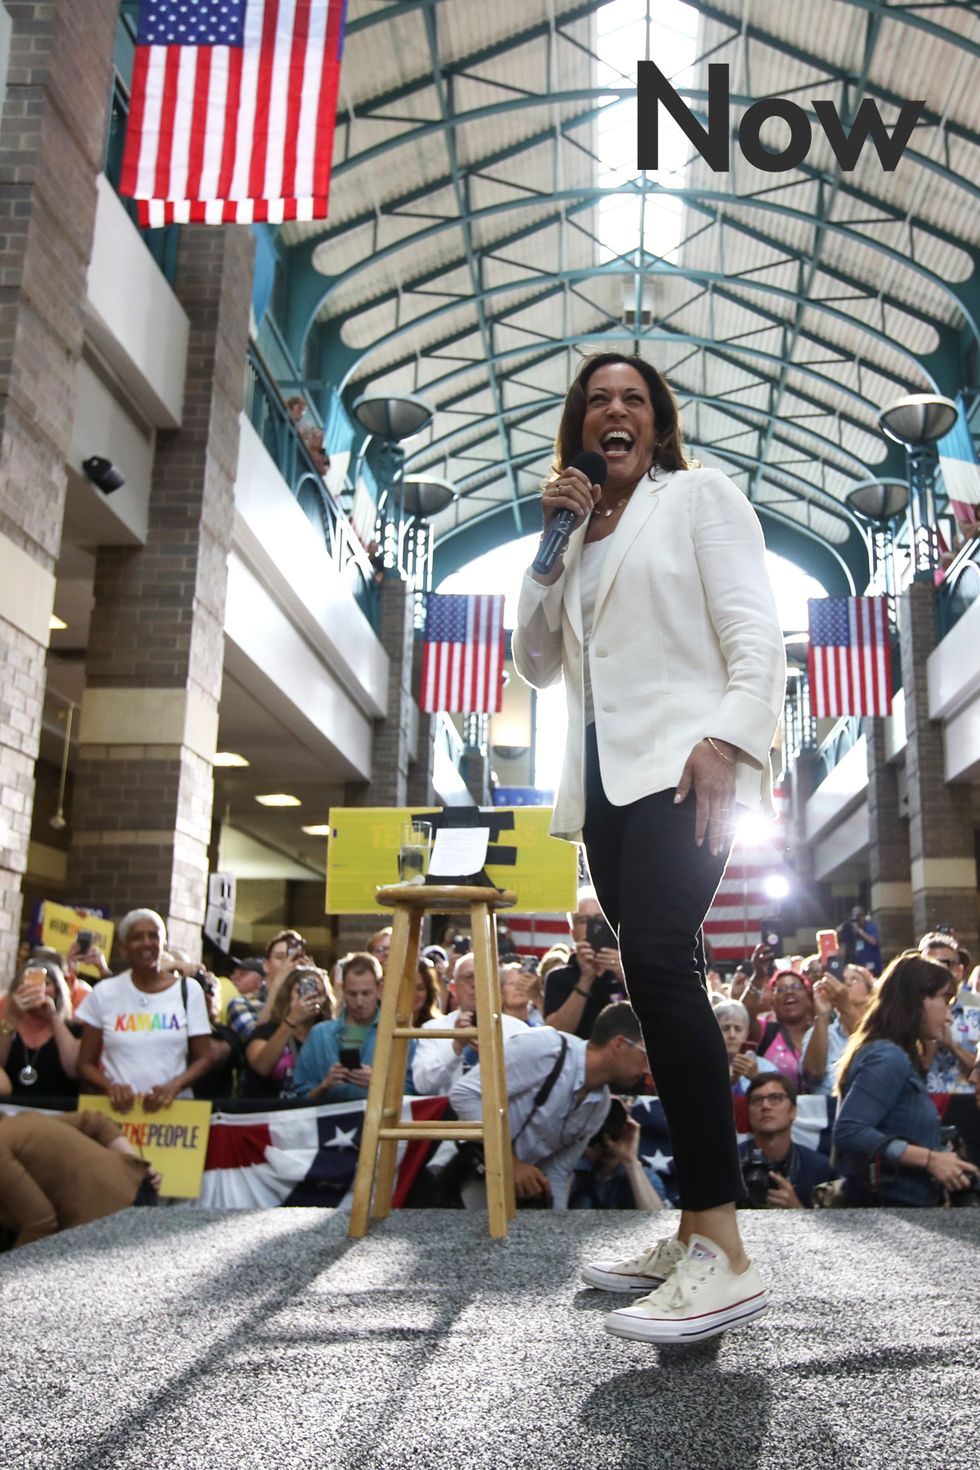 davenport, iowa   august 12 democratic presidential candidate us sen kamala harris d ca speaks during a "for the people" rally on august 12, 2019 in davenport, iowa kamala harris finished her five day river to river bus tour across iowa with a "for the people" rally photo by justin sullivangetty images